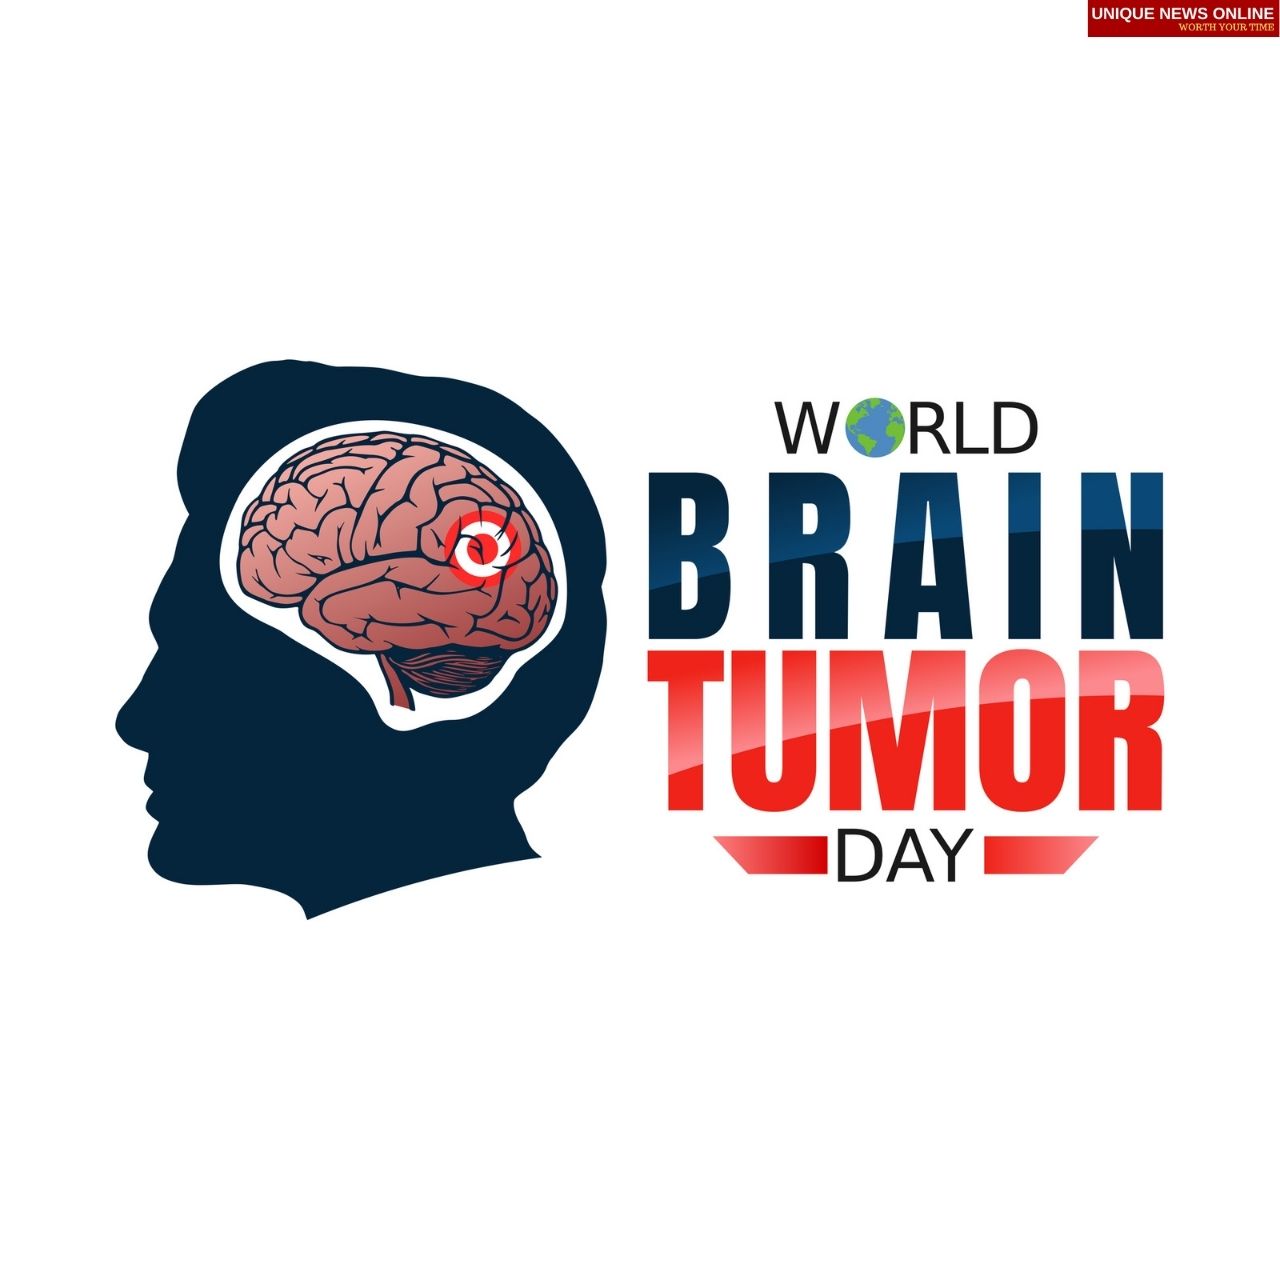 World Brain Tumor Day 2021 Theme, Quotes, Poster, Images, and Messages